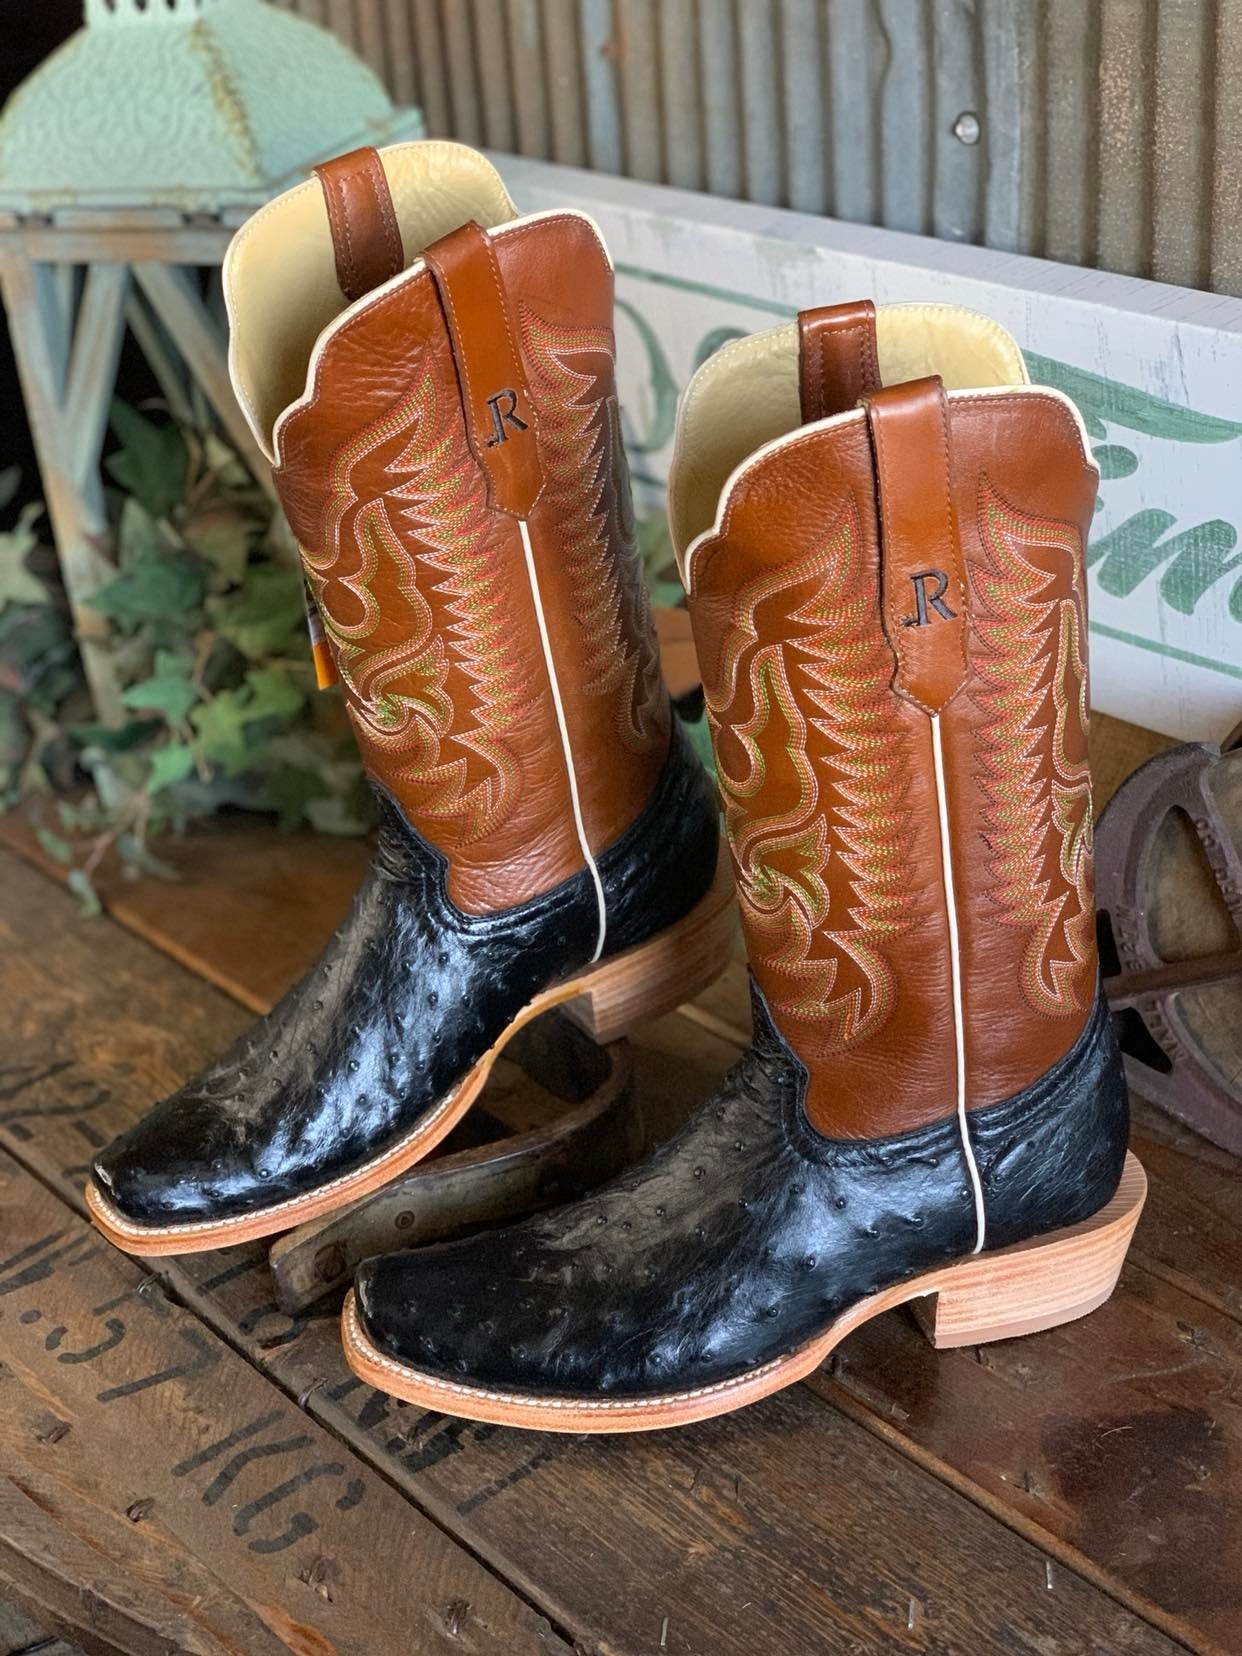 R. Watson Mens Black Full Quill Ostrich & Cognac Sinatra Cowhide-Men's Boots-R. Watson-Lucky J Boots & More, Women's, Men's, & Kids Western Store Located in Carthage, MO